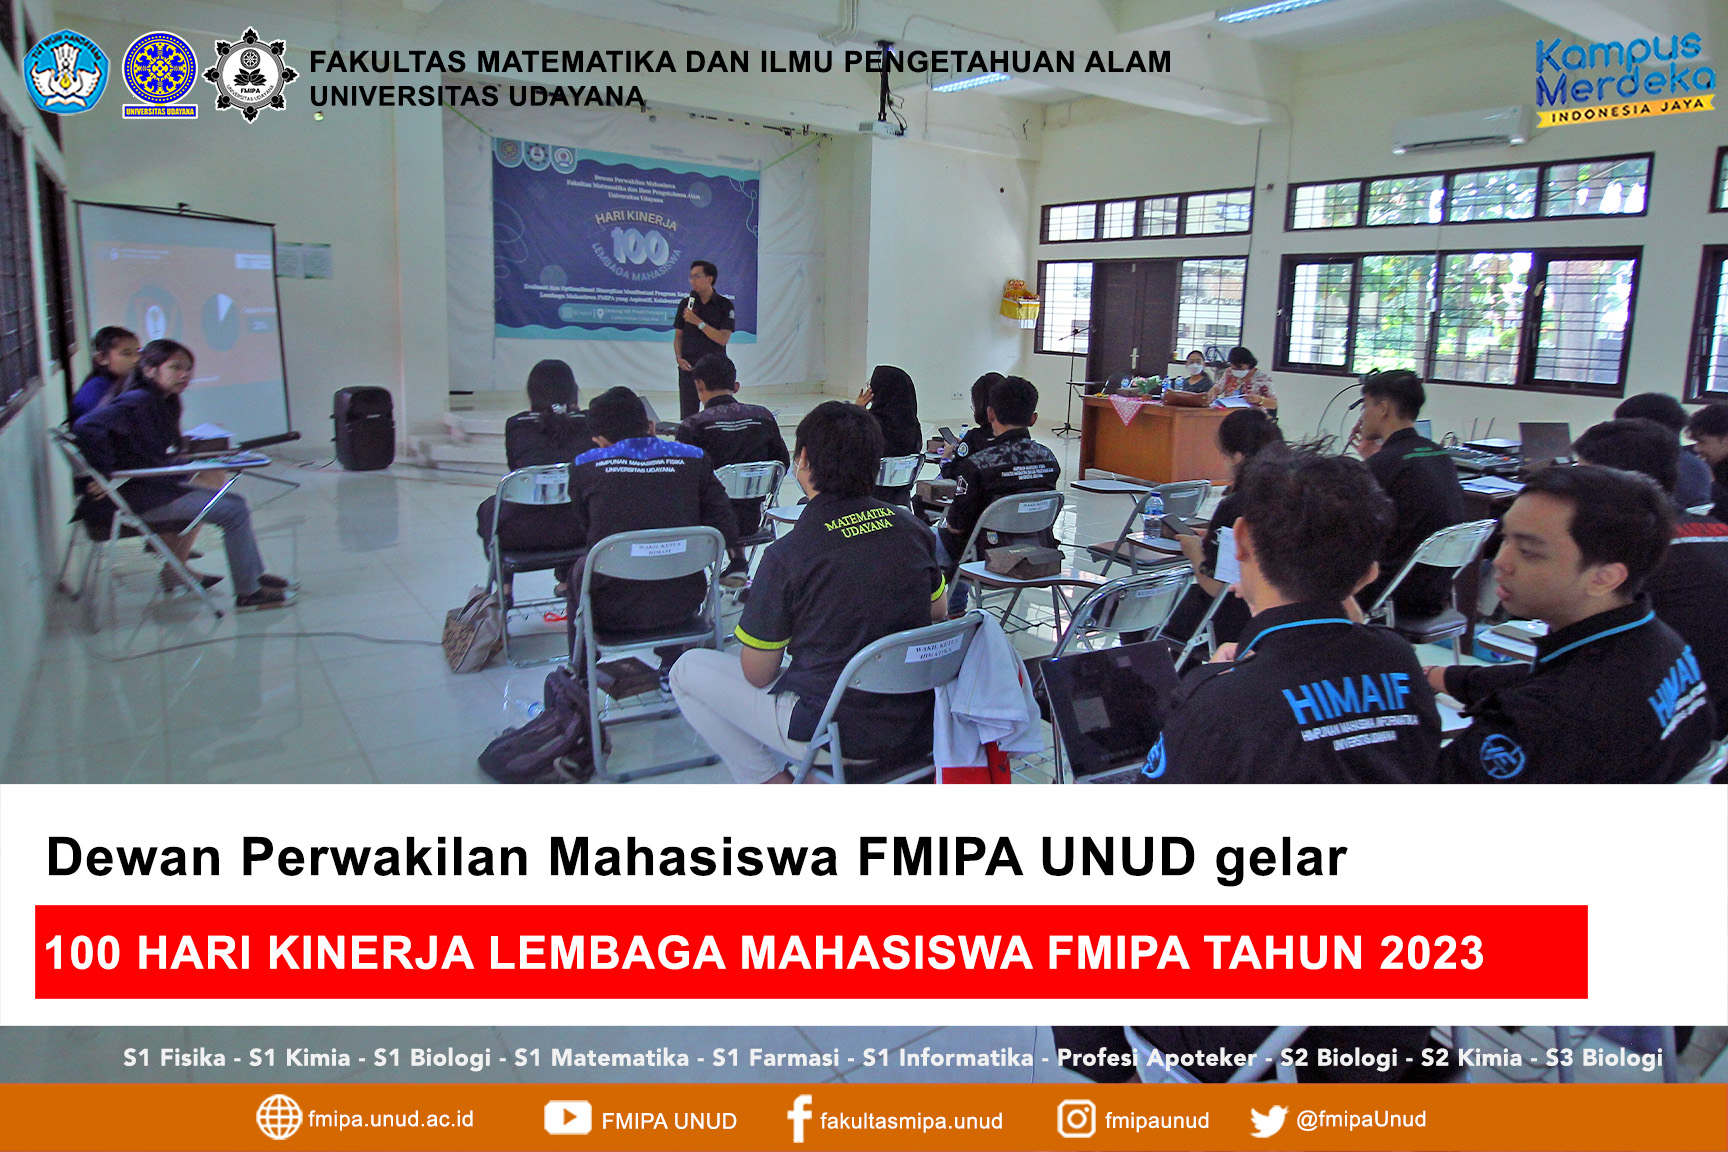 100 DAY PERFORMANCE OF FMIPA STUDENT INSTITUTIONS IN 2023